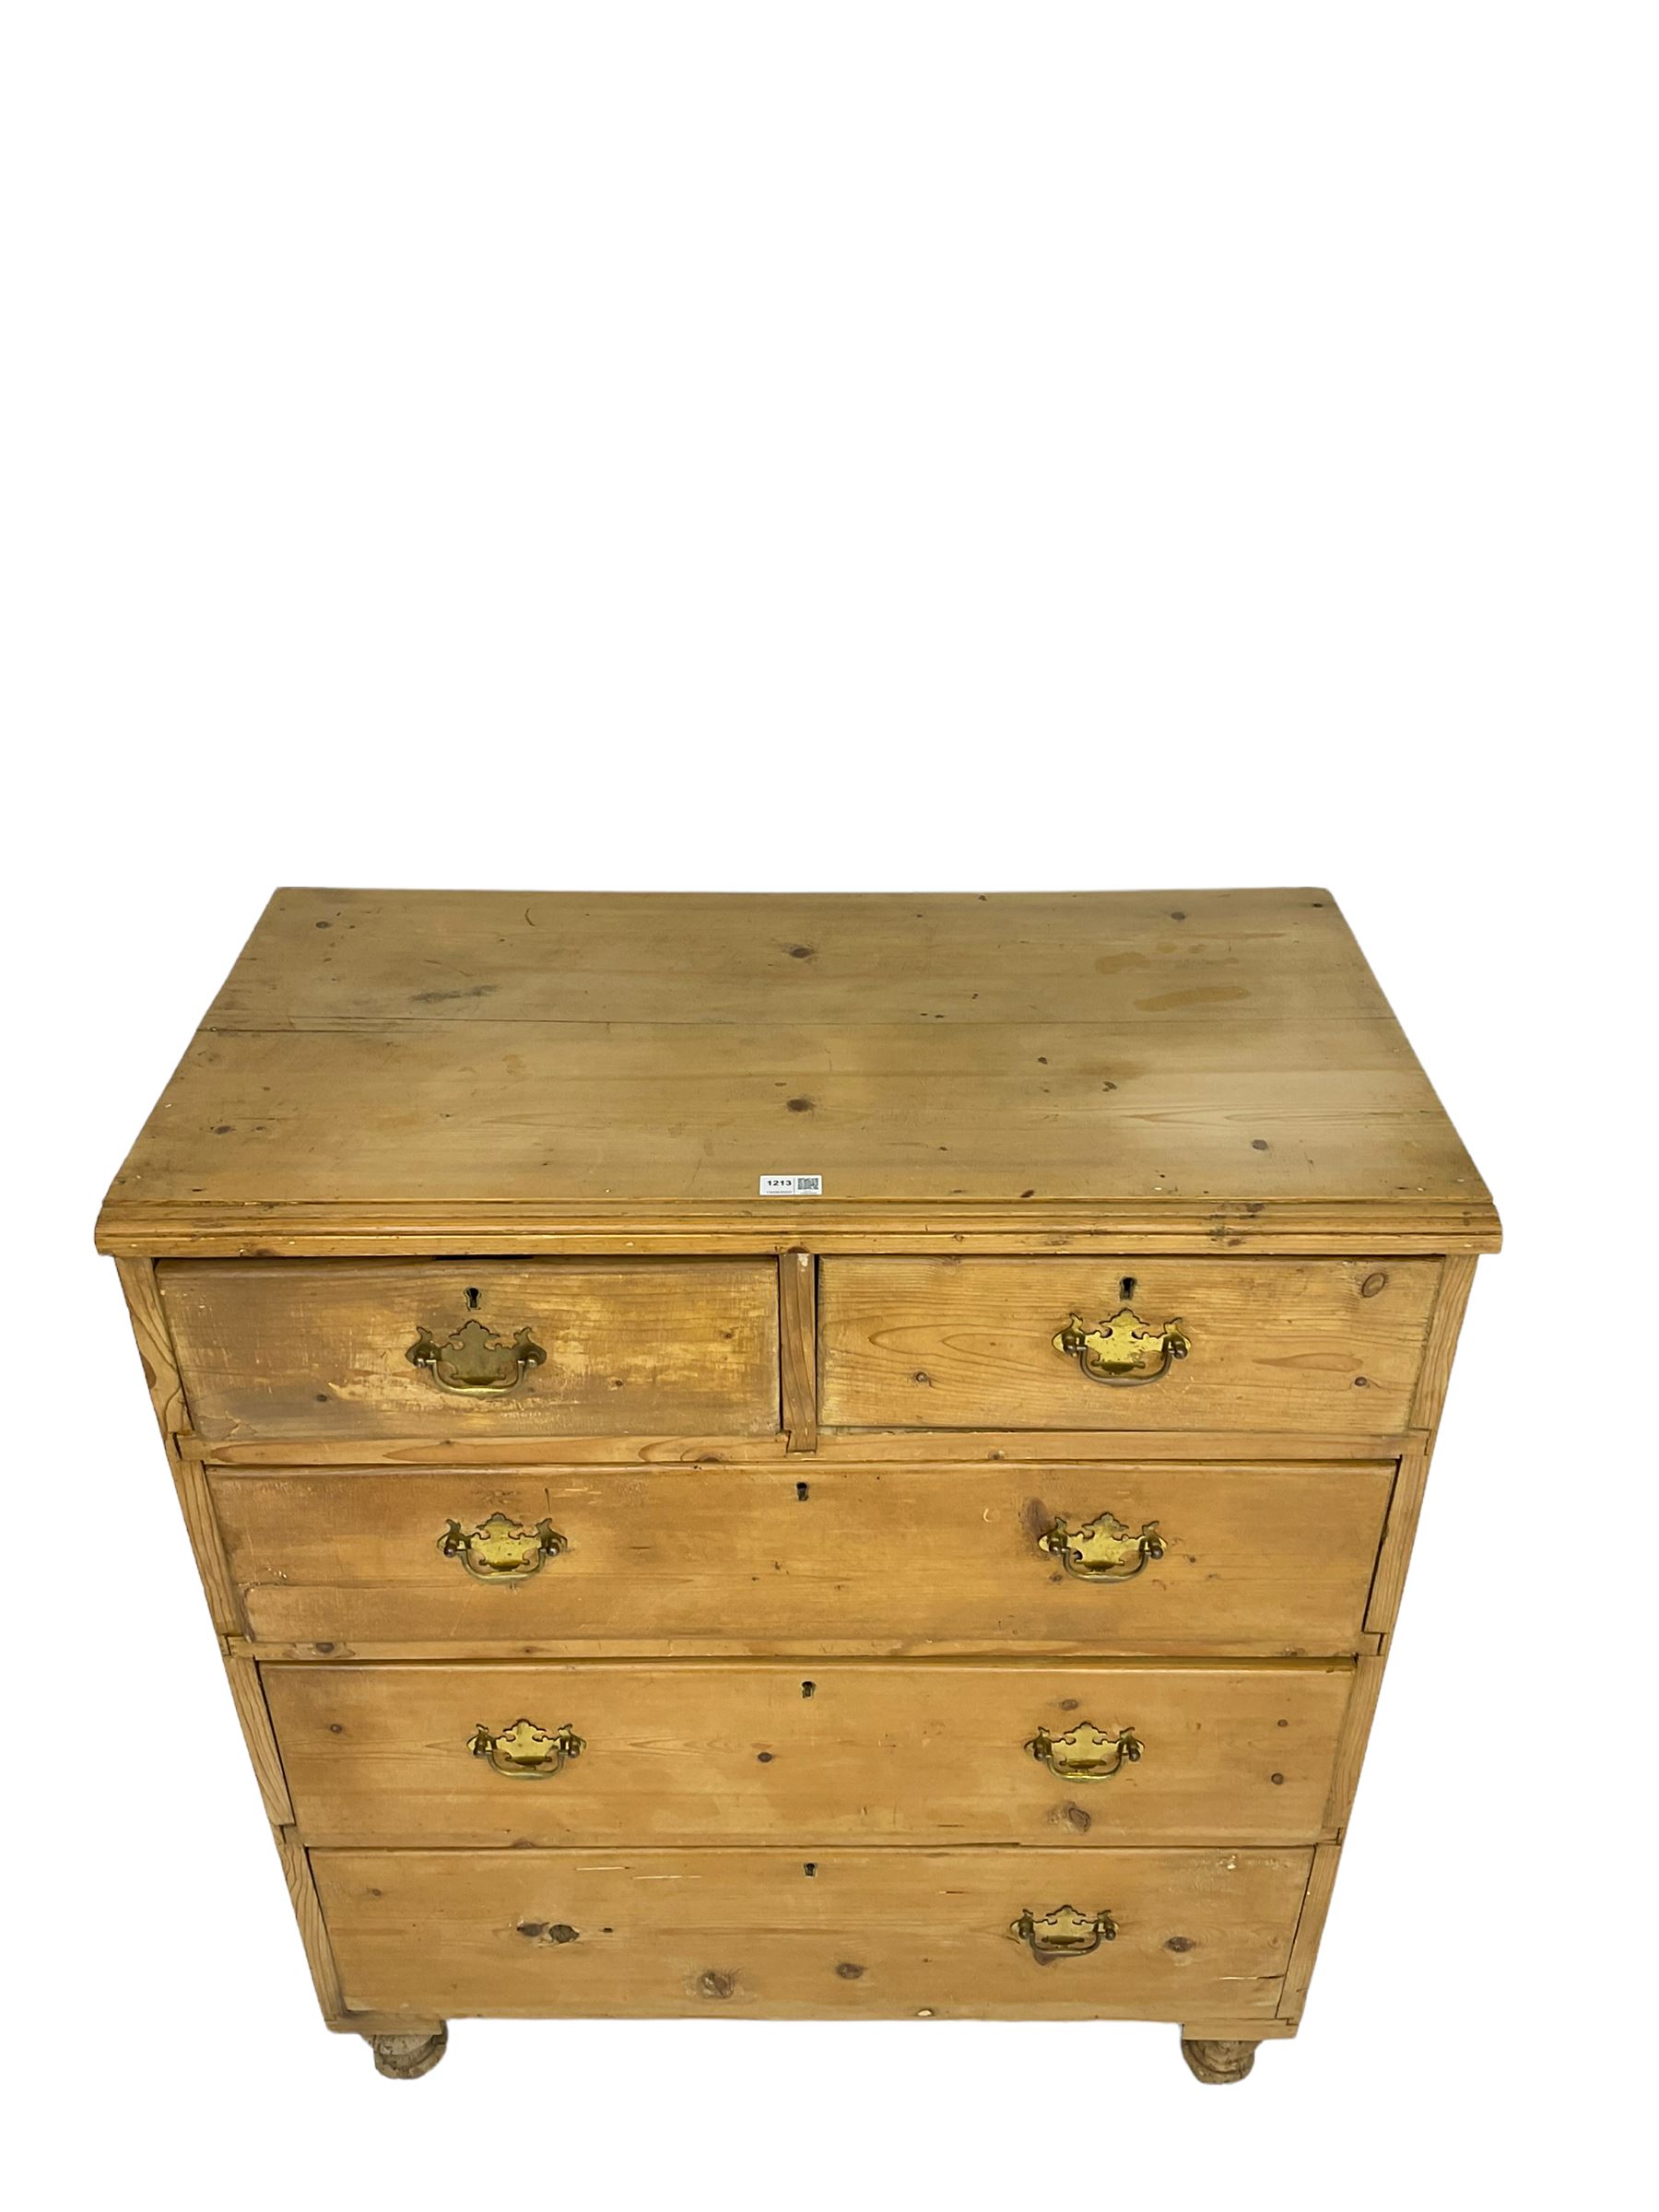 Victorian waxed pine chest - Image 6 of 7